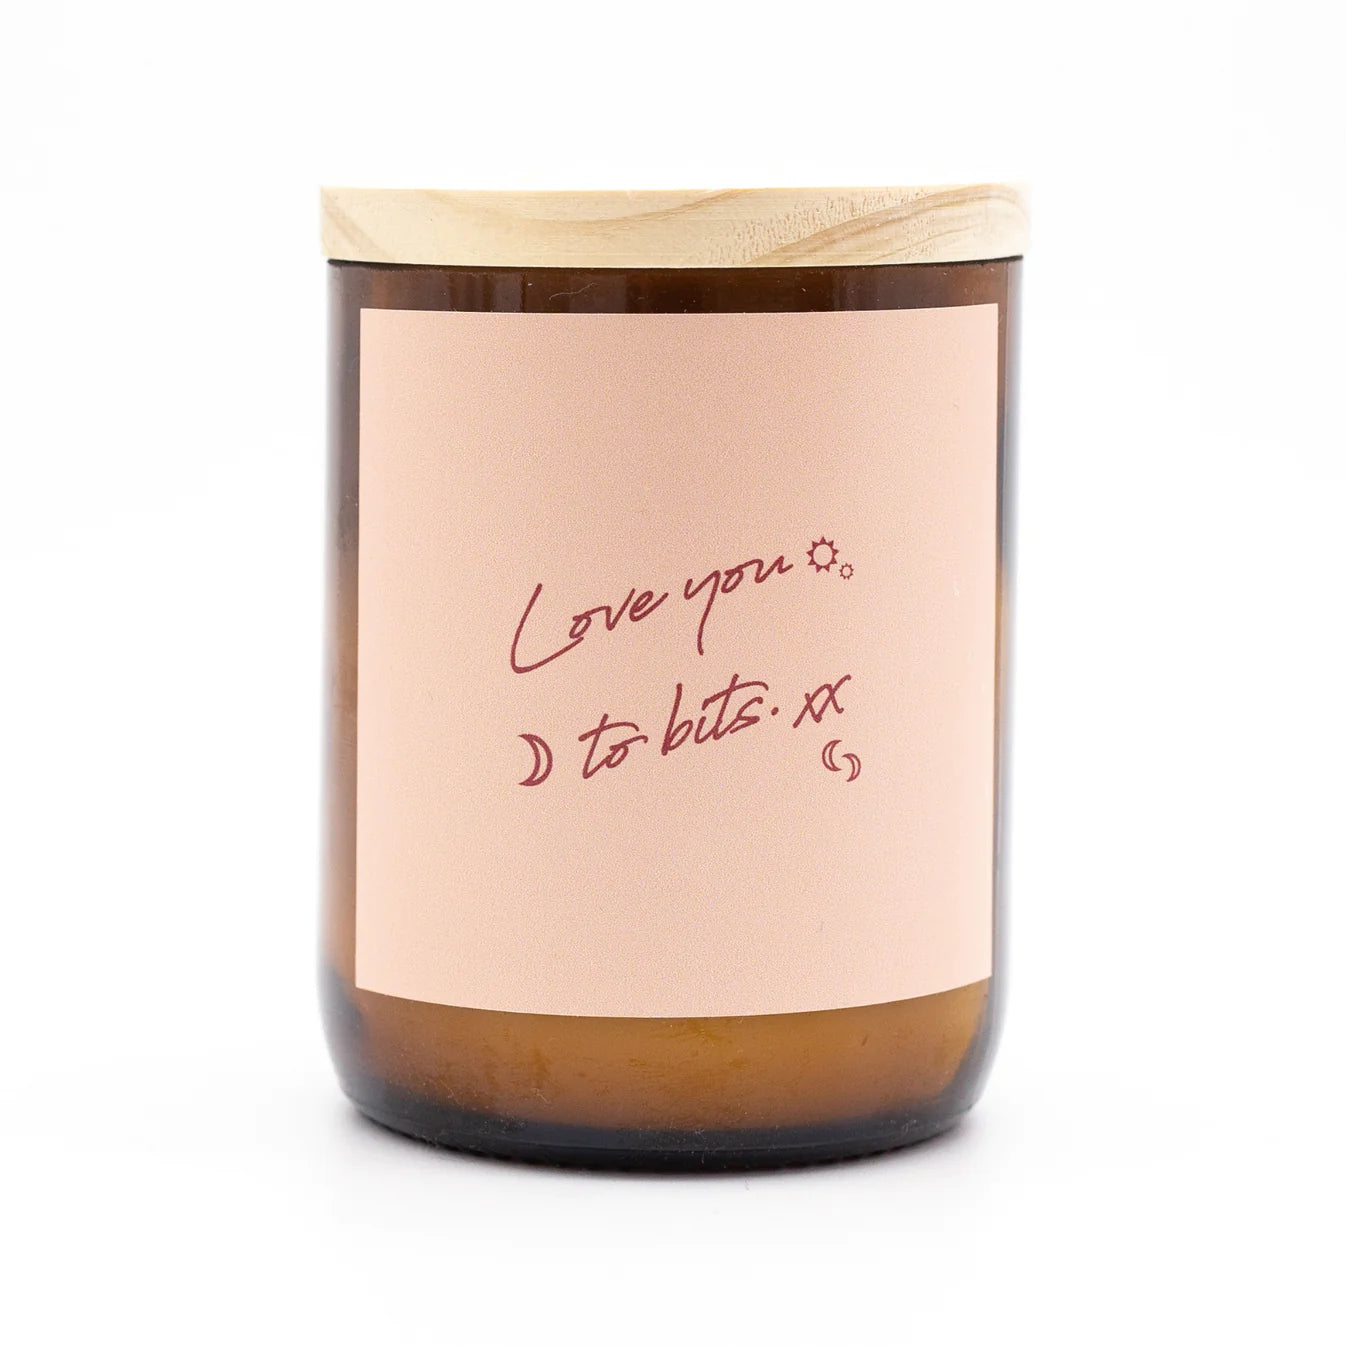 Love you to bits Candle - Sage, Safron + Amber